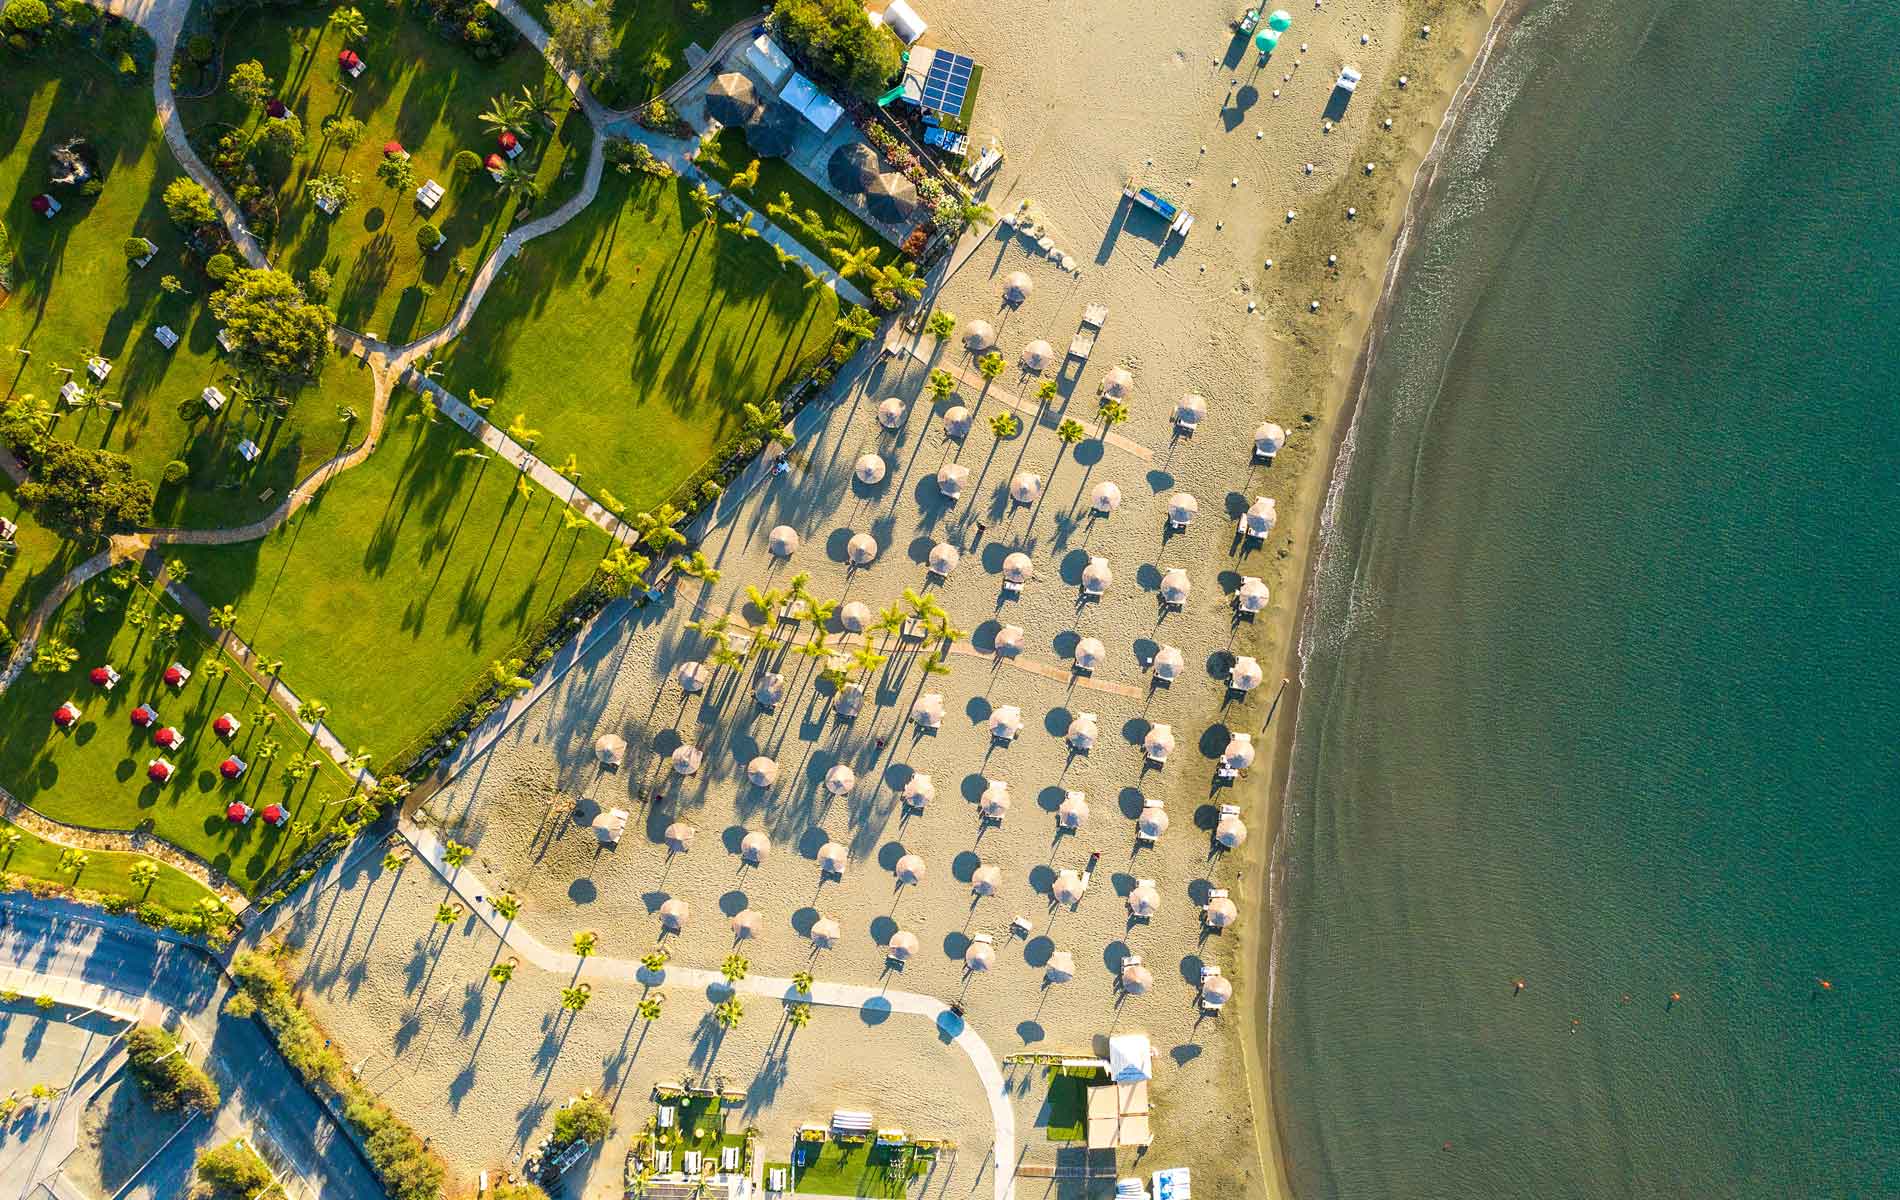 An aerial view of the beach and beach umbrellas at St Raphael Resort.